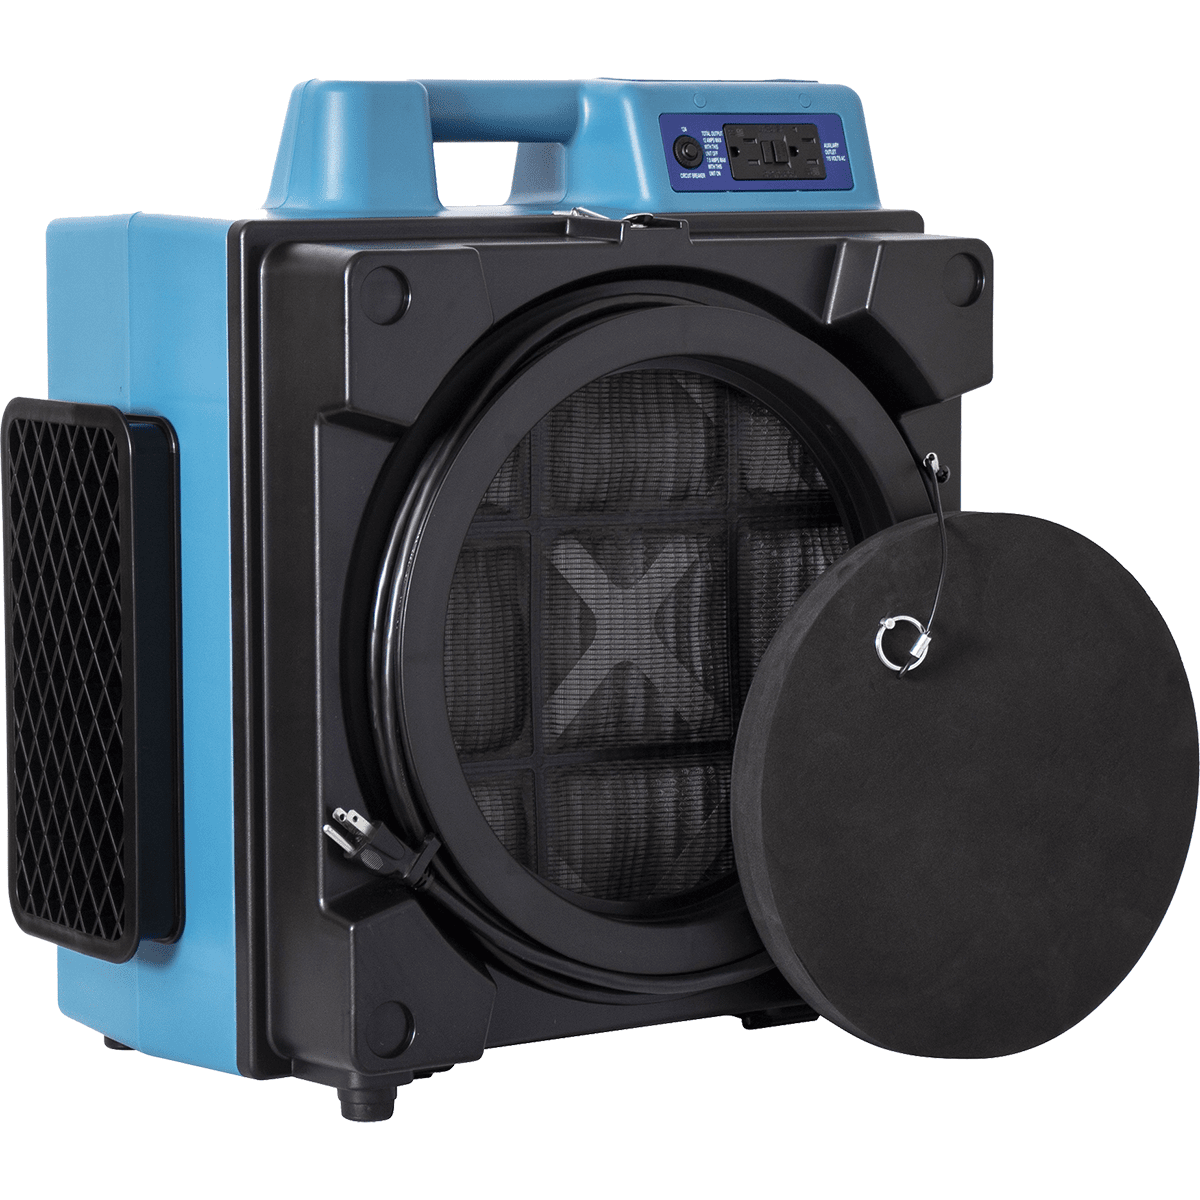 XPOWER X-4700A Professional 3-Stage HEPA Air Scrubber